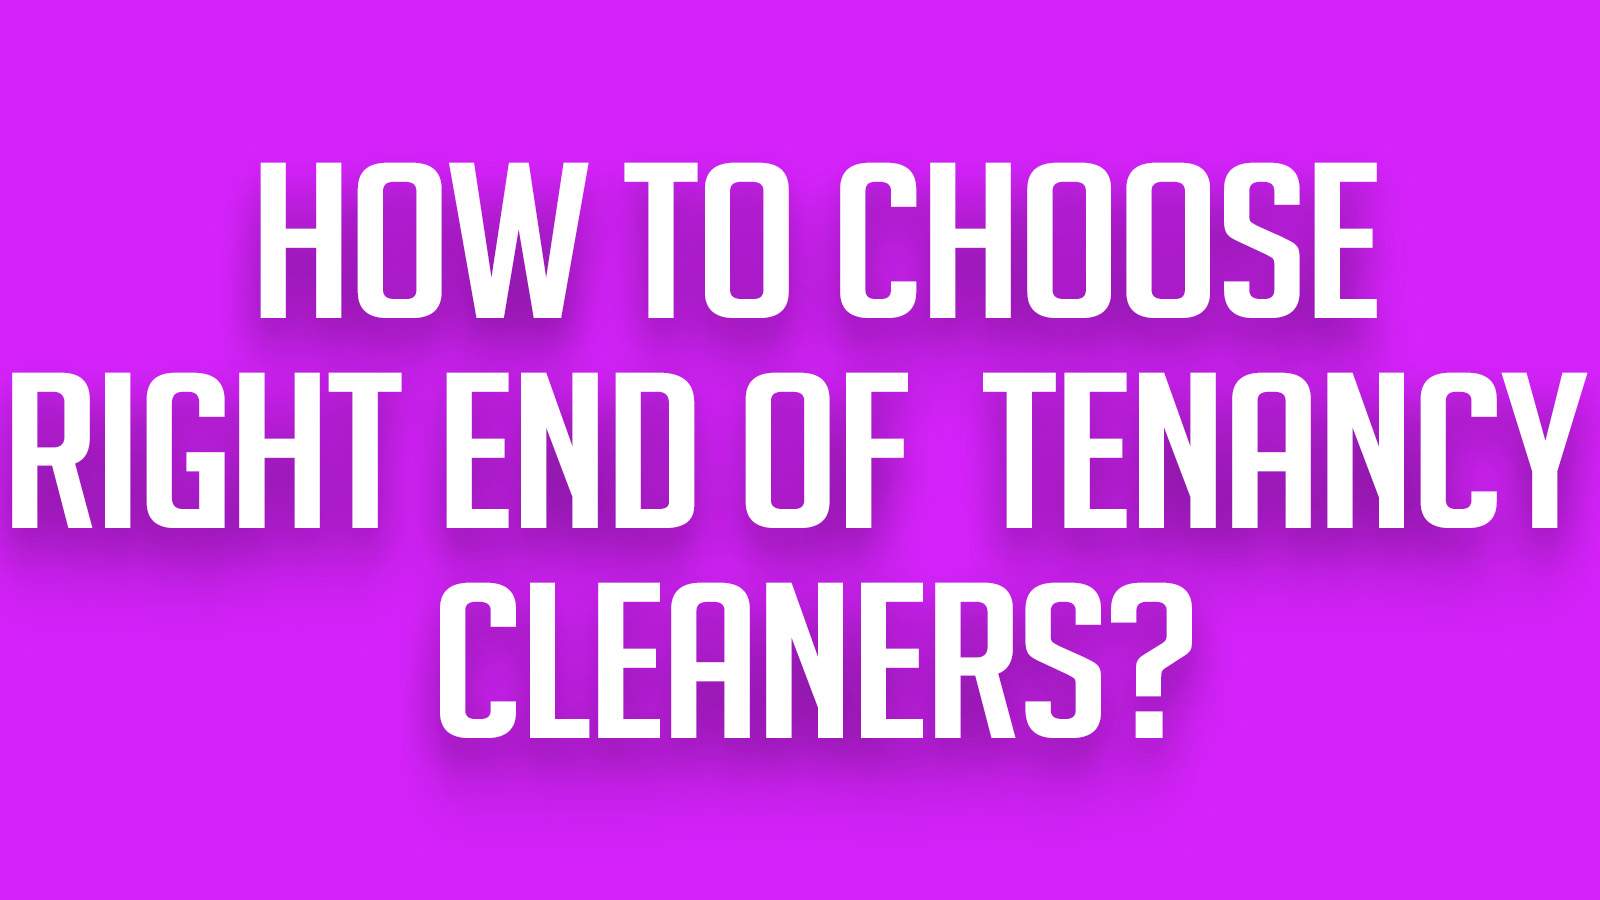 How to choose right end of tenancy cleaners?